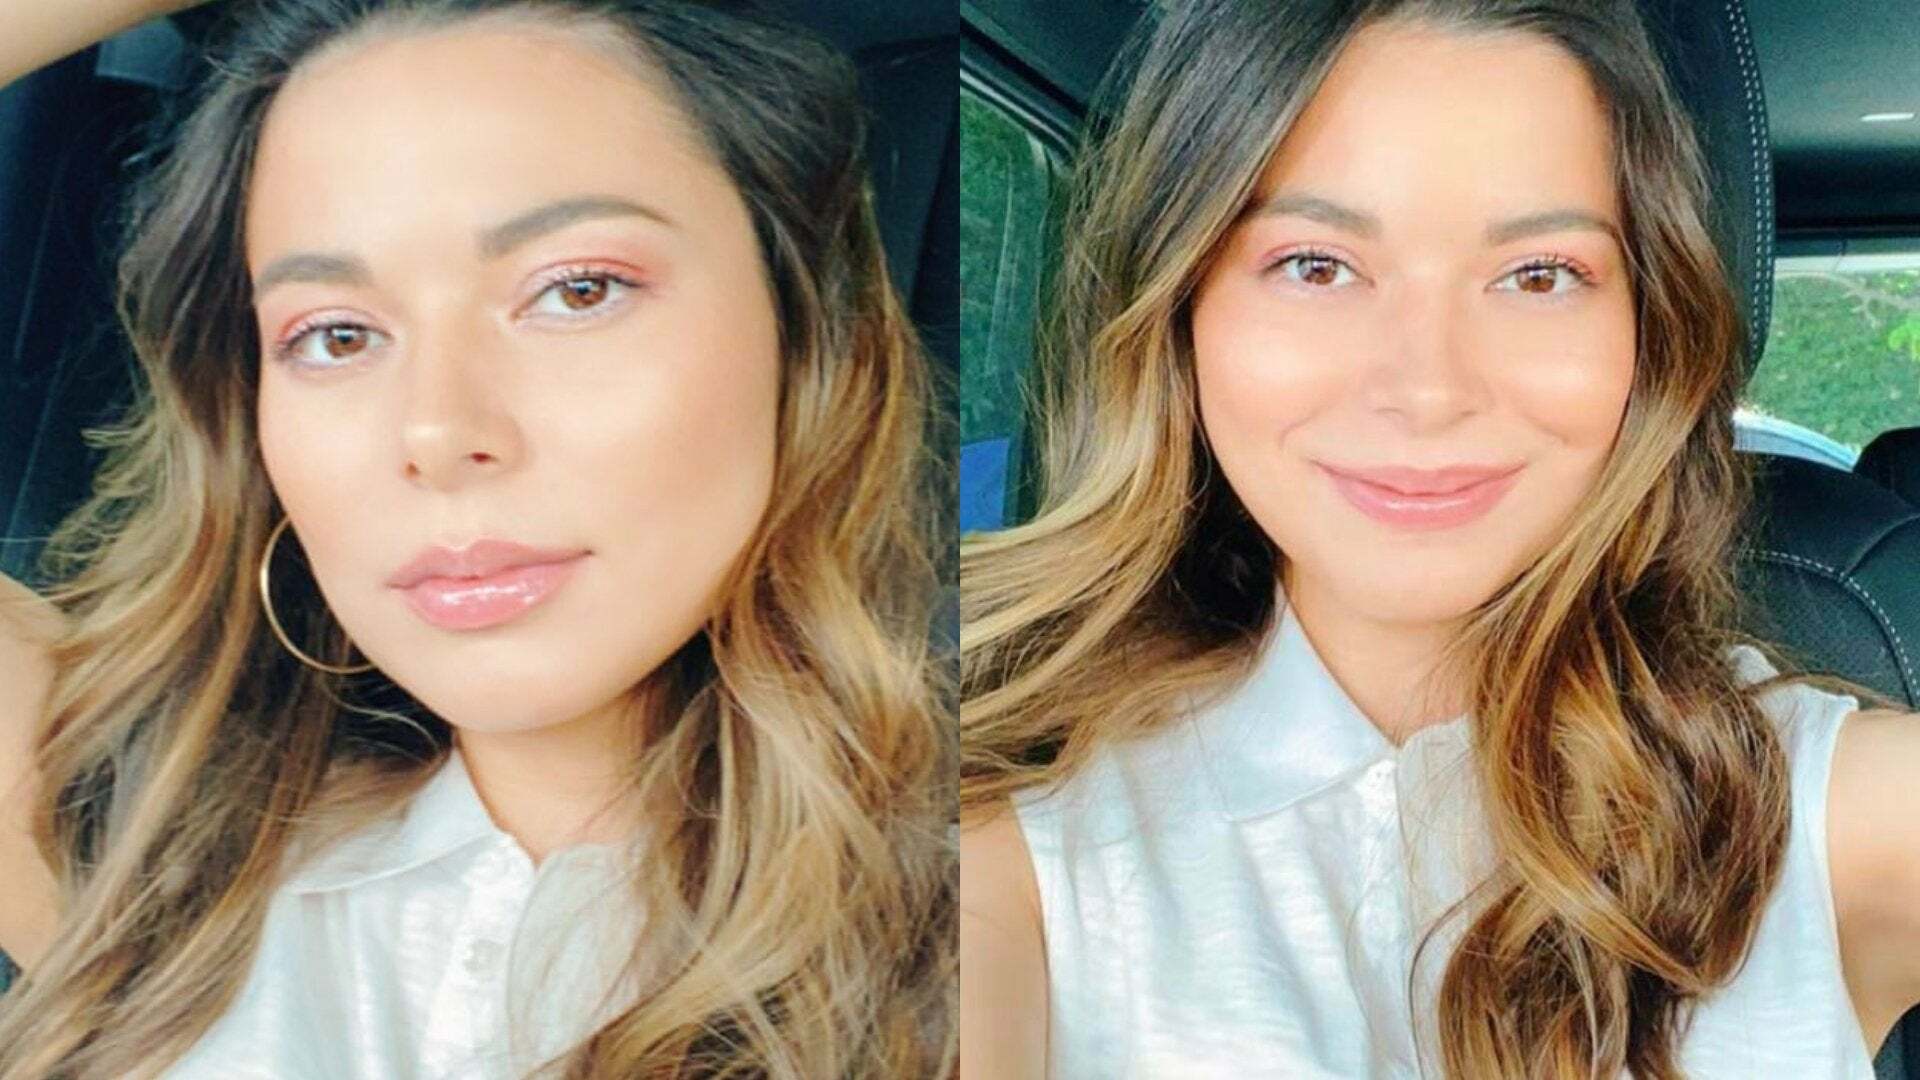 imagine Miranda Cosgrove's soft lips on your cock and your cum on her face.